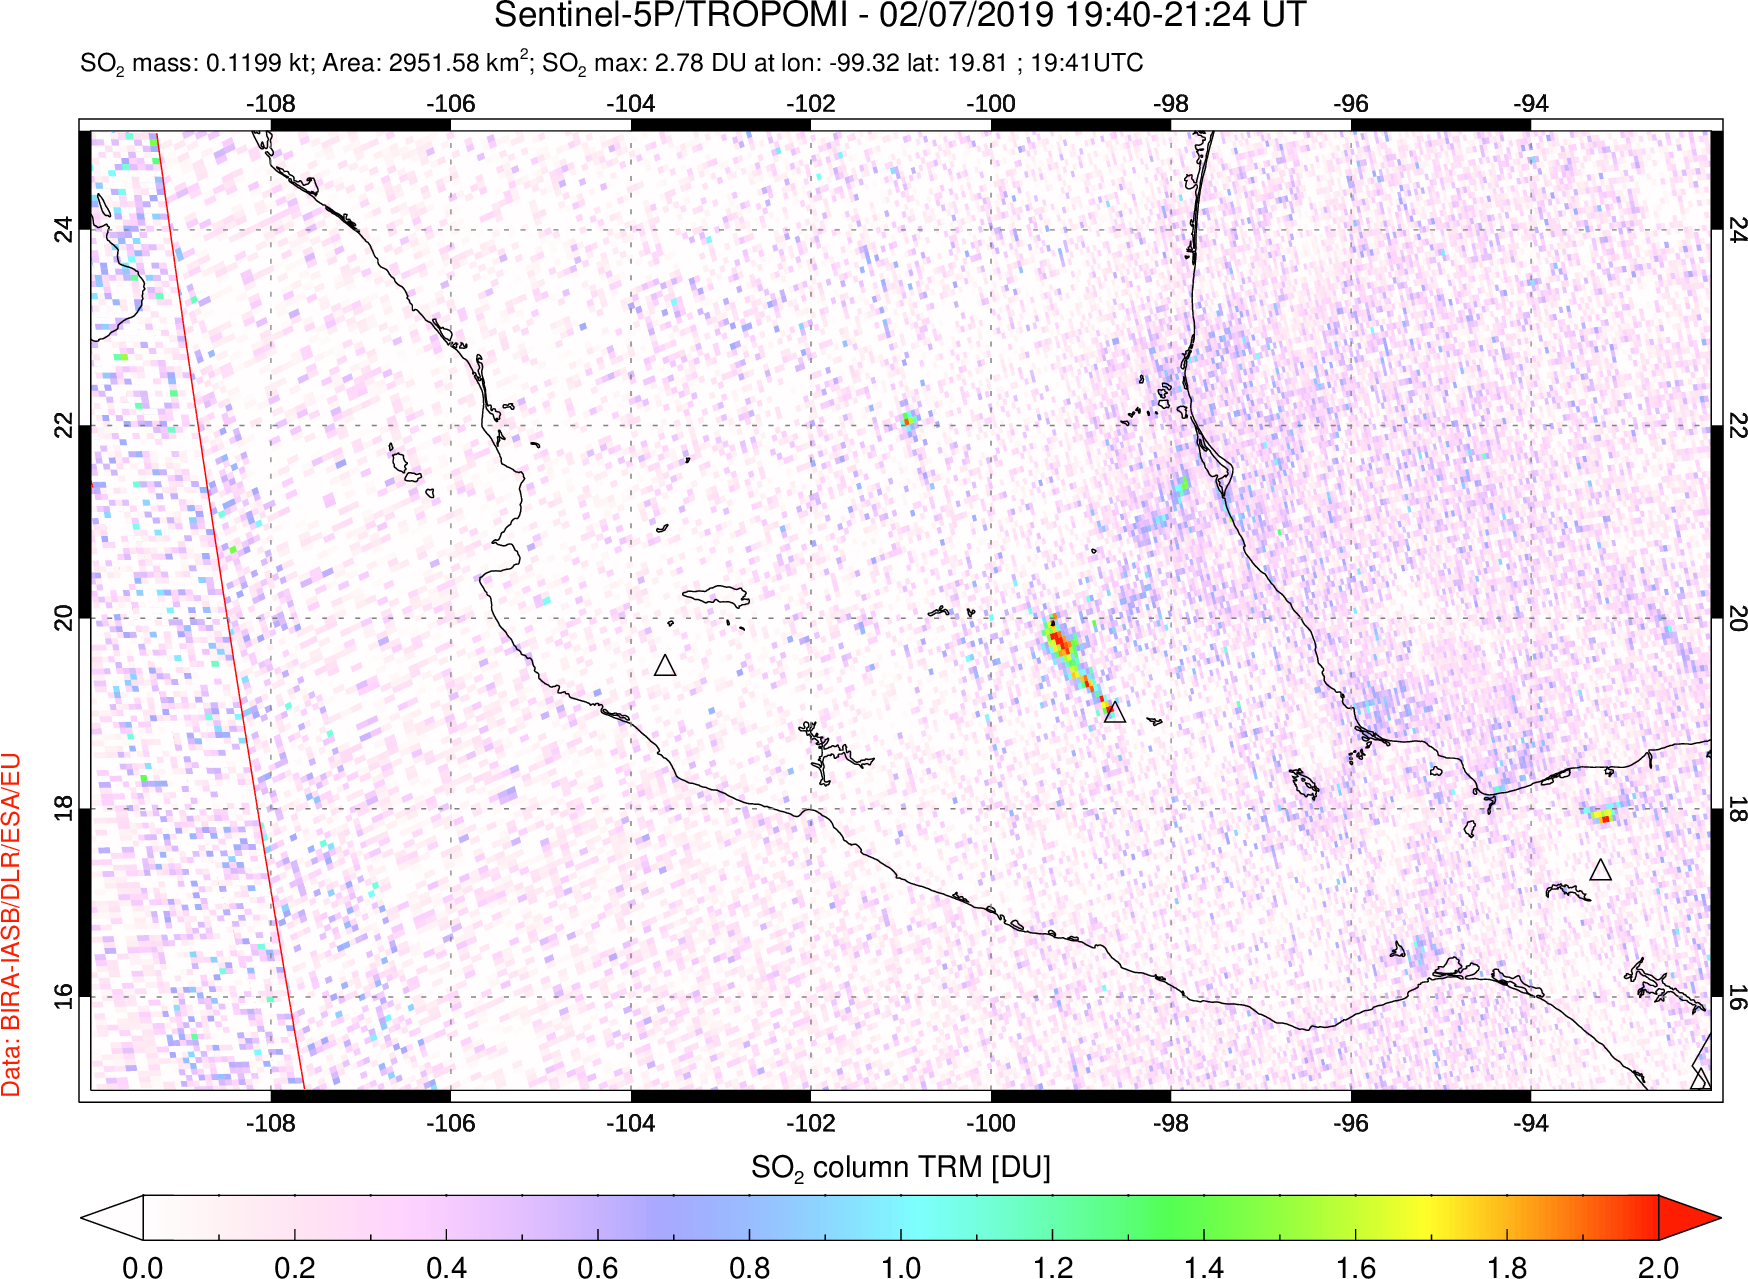 A sulfur dioxide image over Mexico on Feb 07, 2019.